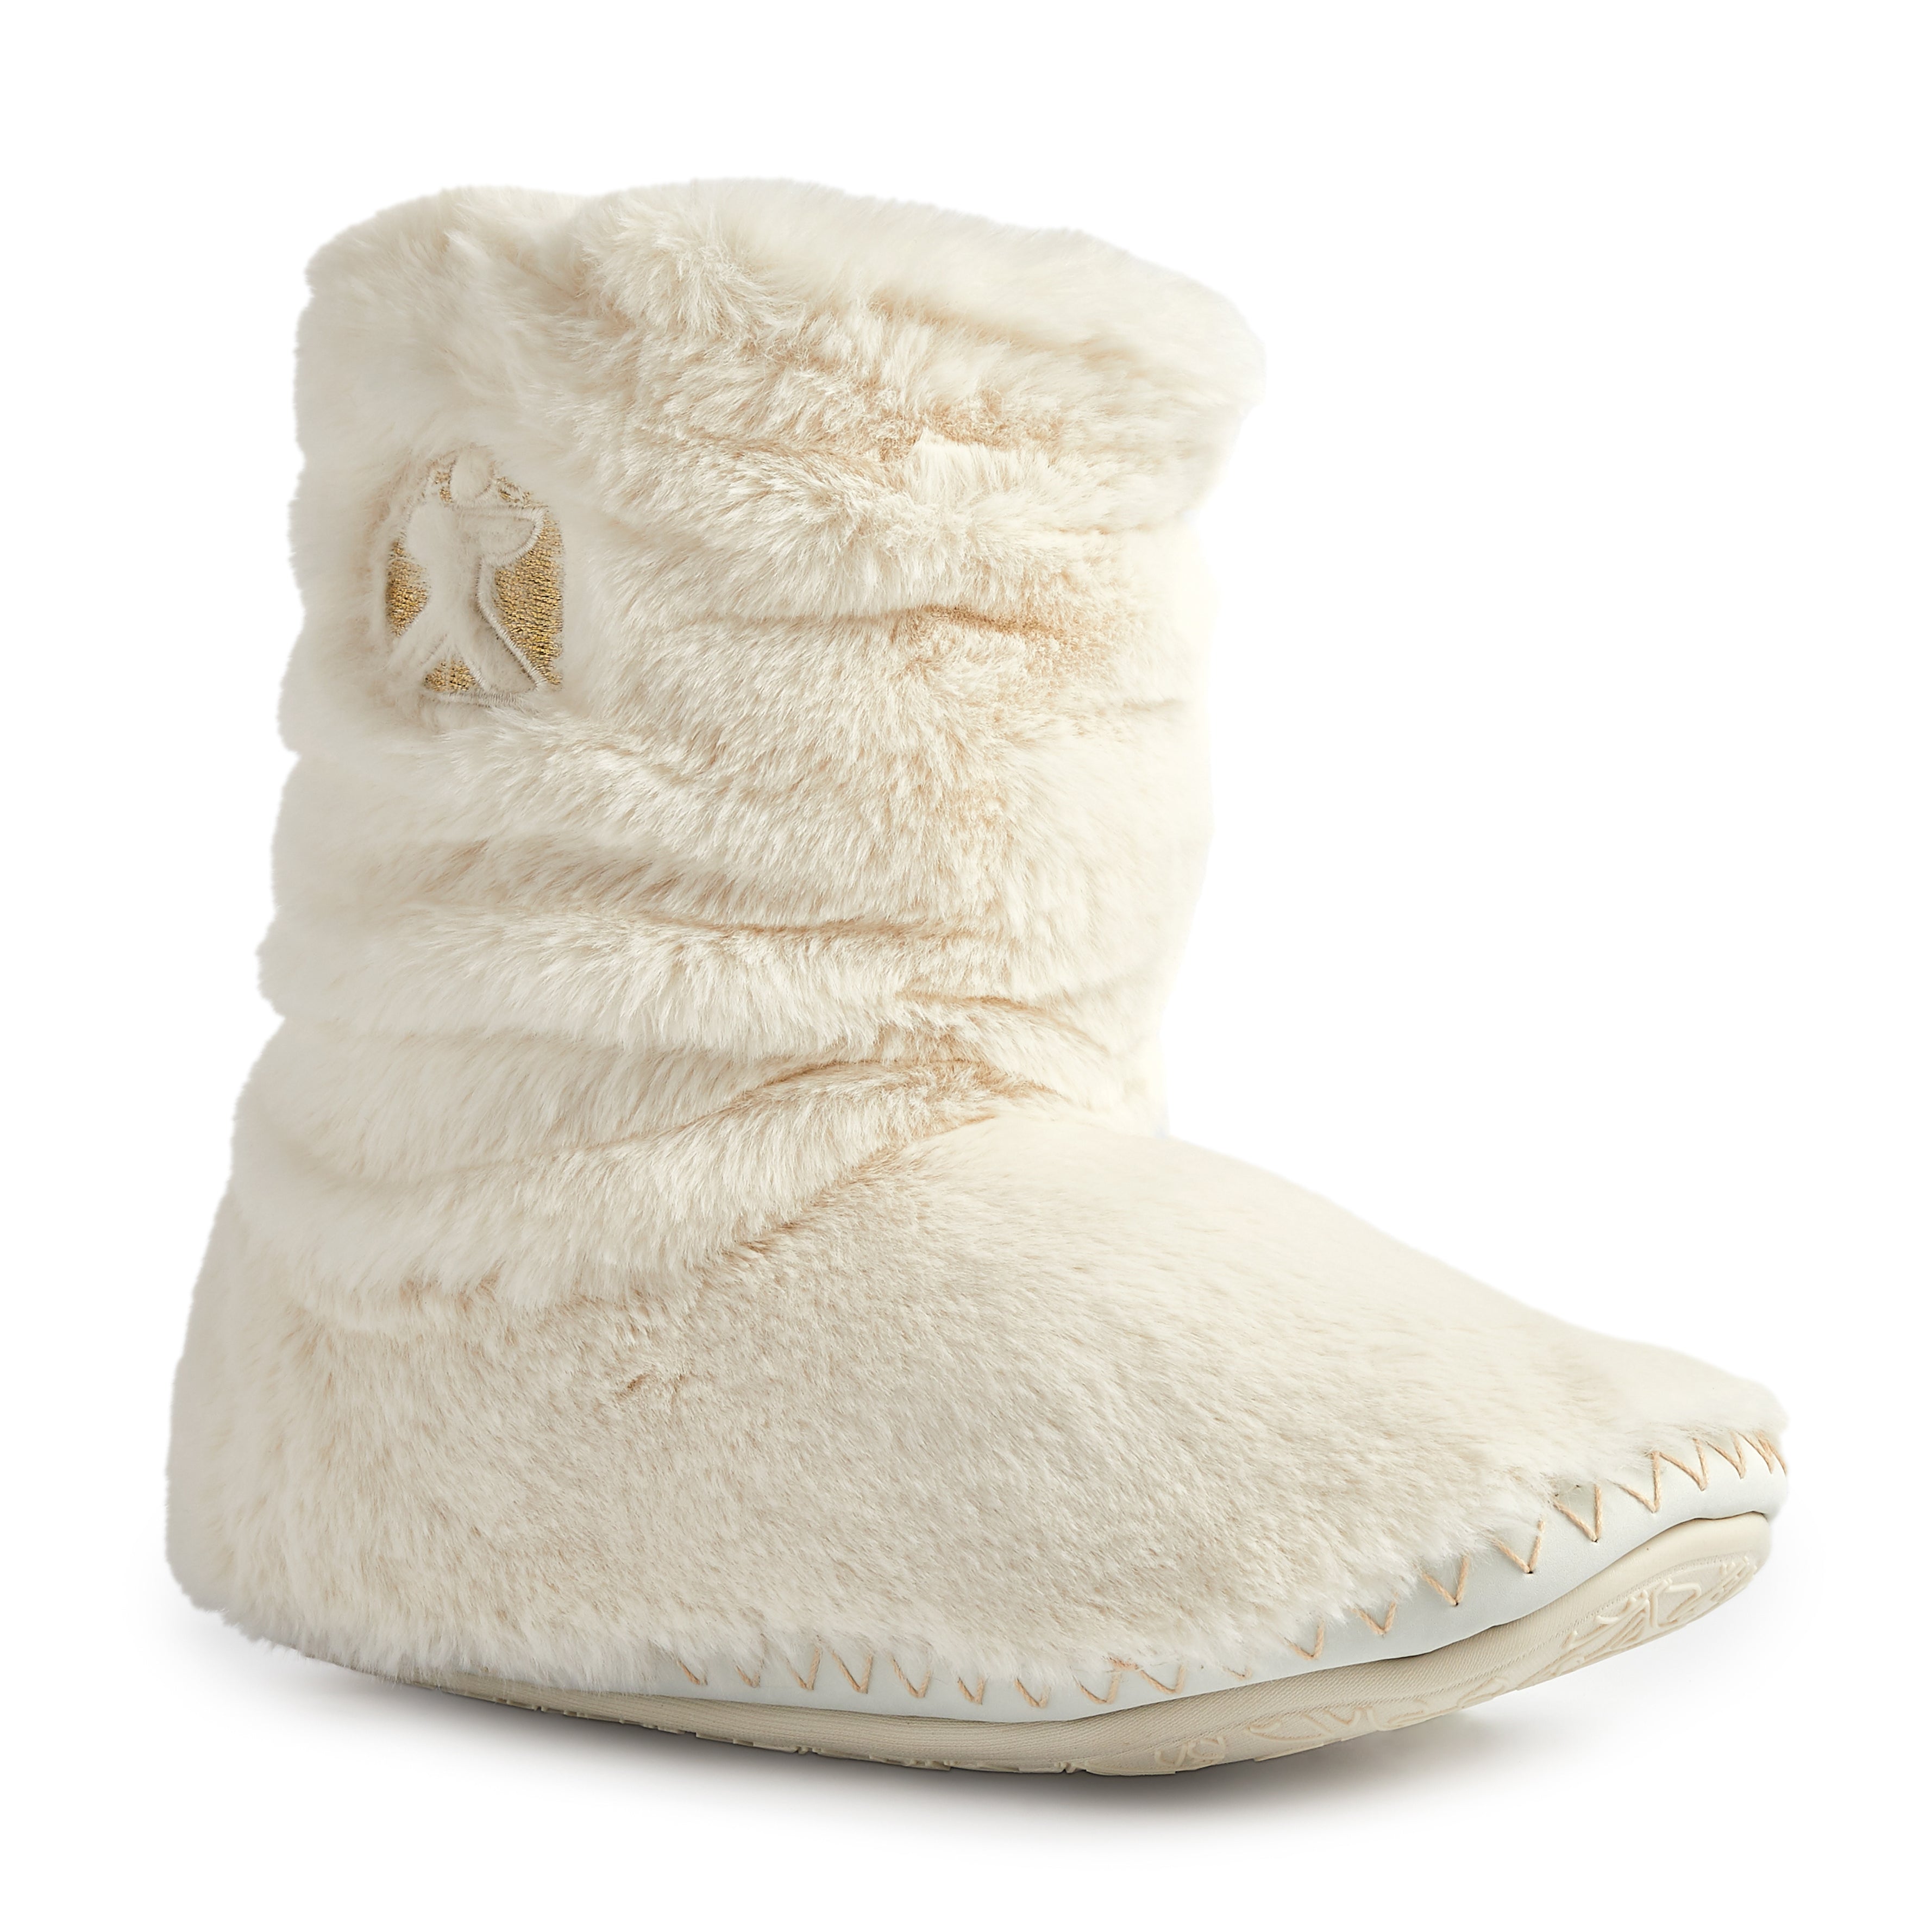 Puffin Slipper Boots in Grey | Number One Shoes